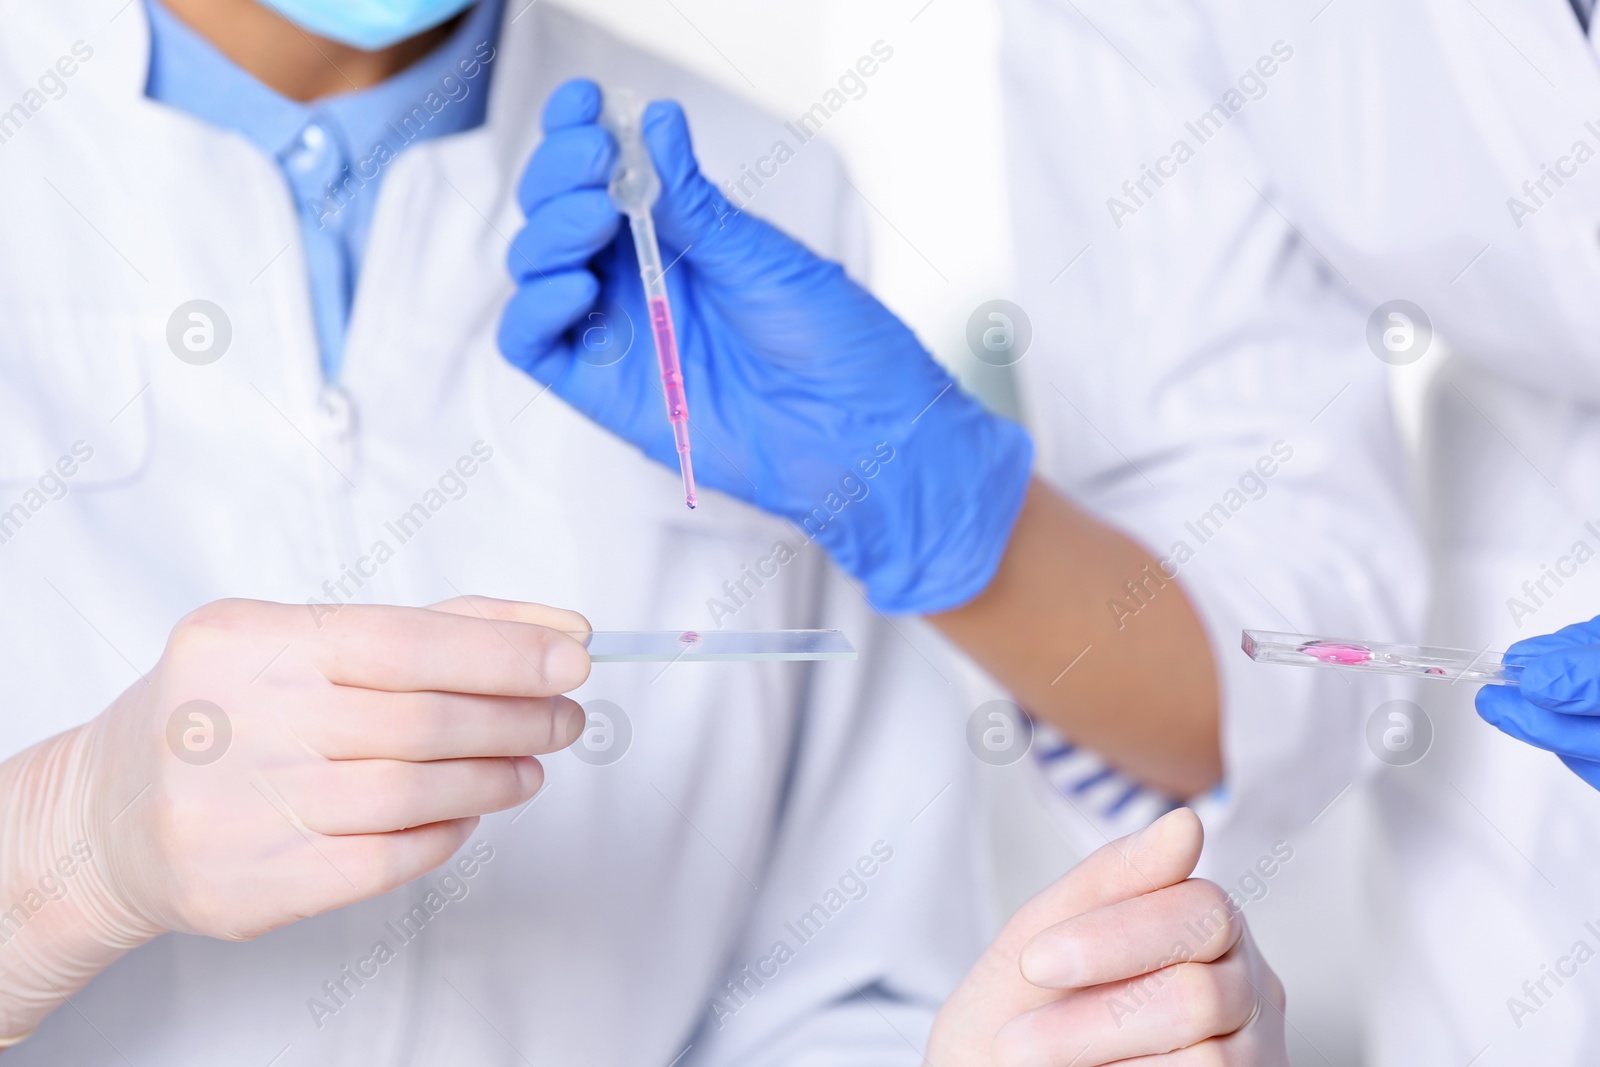 Photo of Scientists working in laboratory, closeup view. Research and analysis